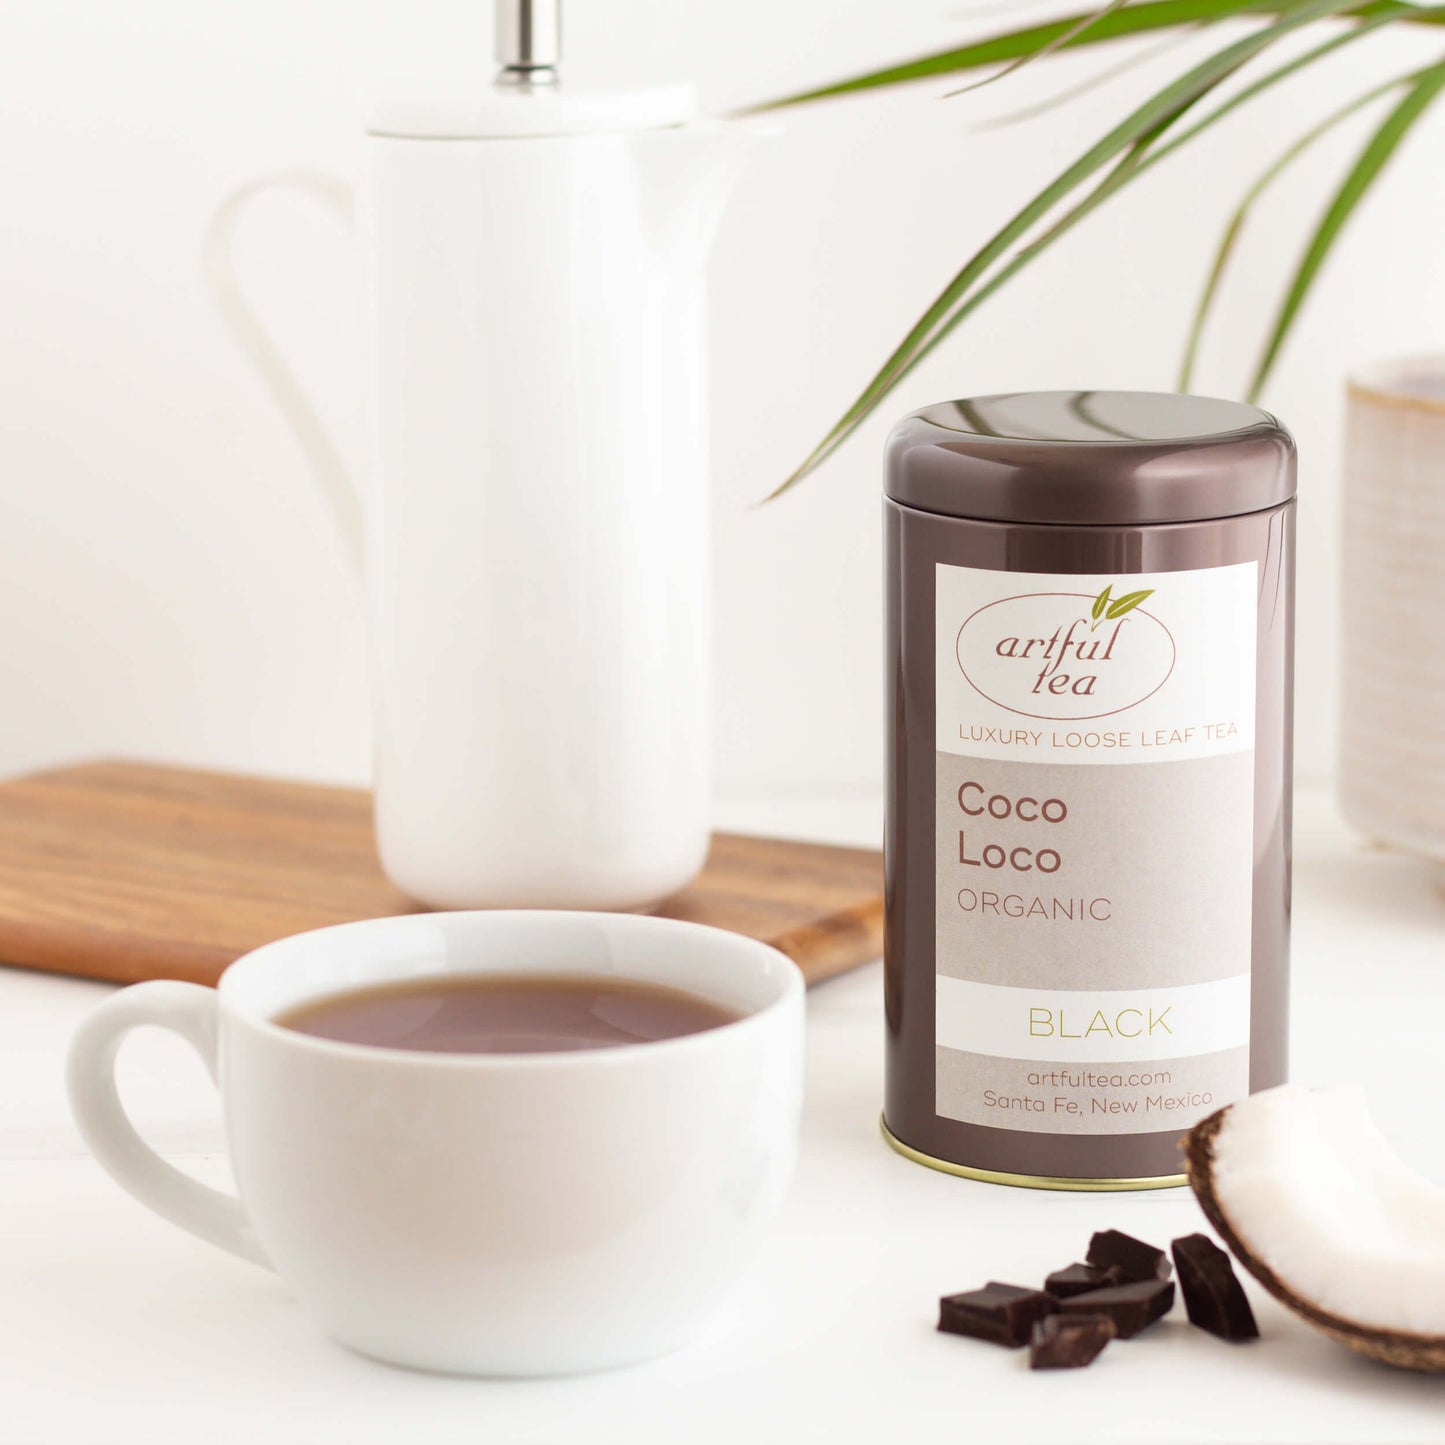 Coco Loco Organic Black Tea shown packaged in a brown tin, with a white mug of brewed tea, some chocolate pieces and a piece of coconut in the foreground, and a tall white teapot and green plant in the background